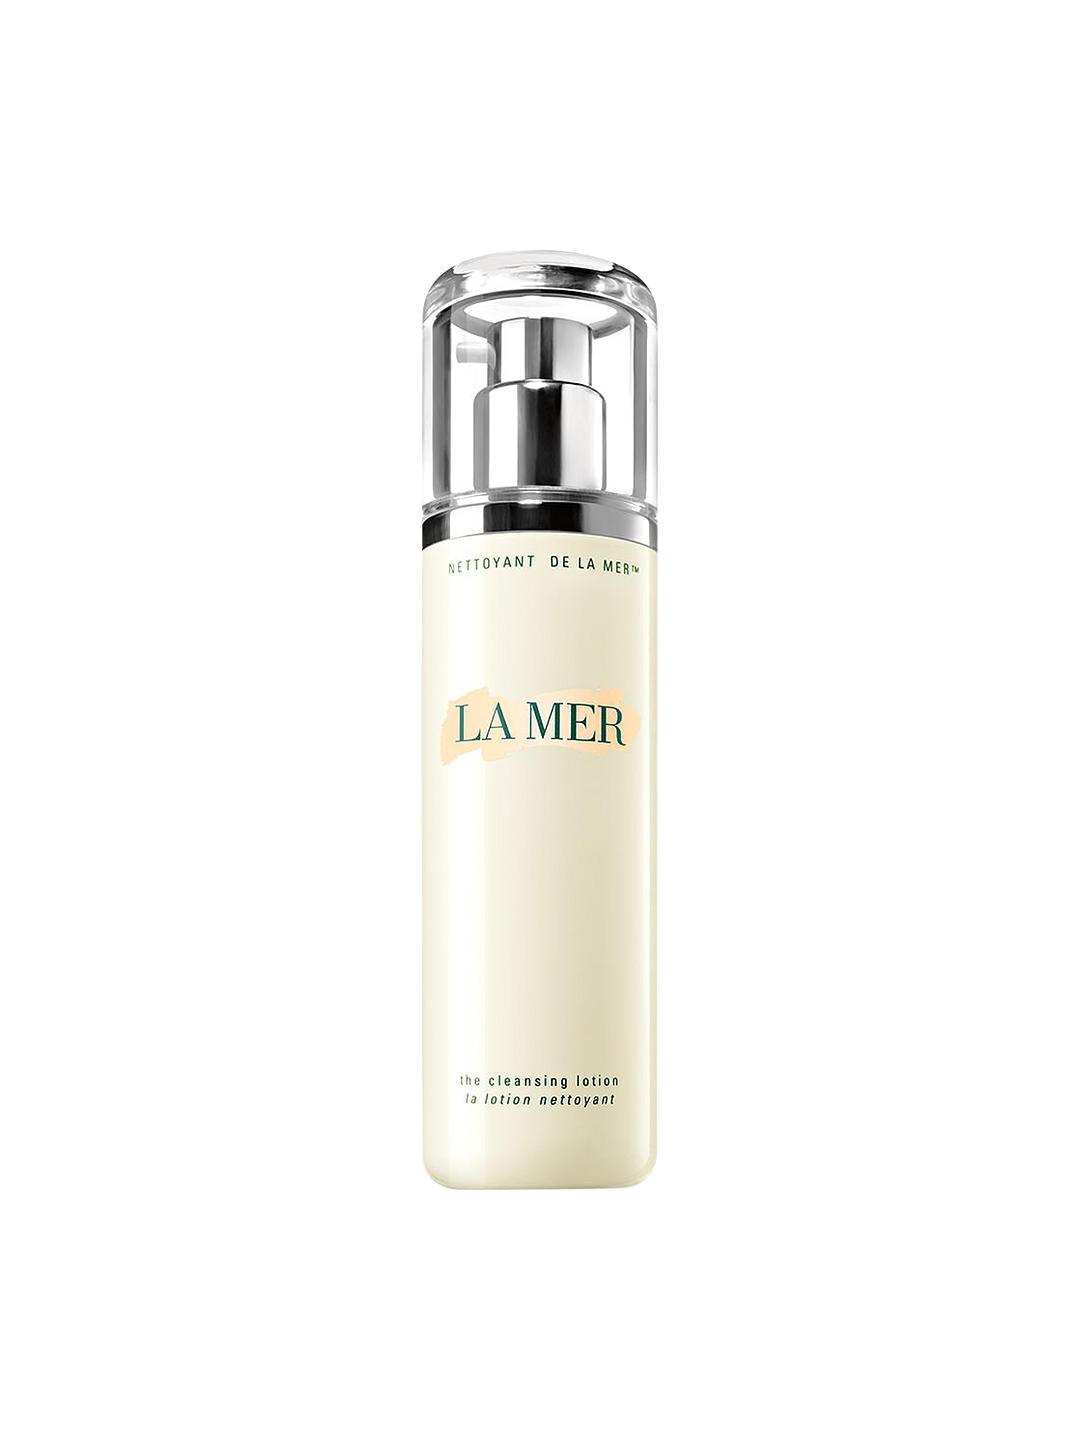 La Mer The Cleansing Lotion - Perfume Oasis